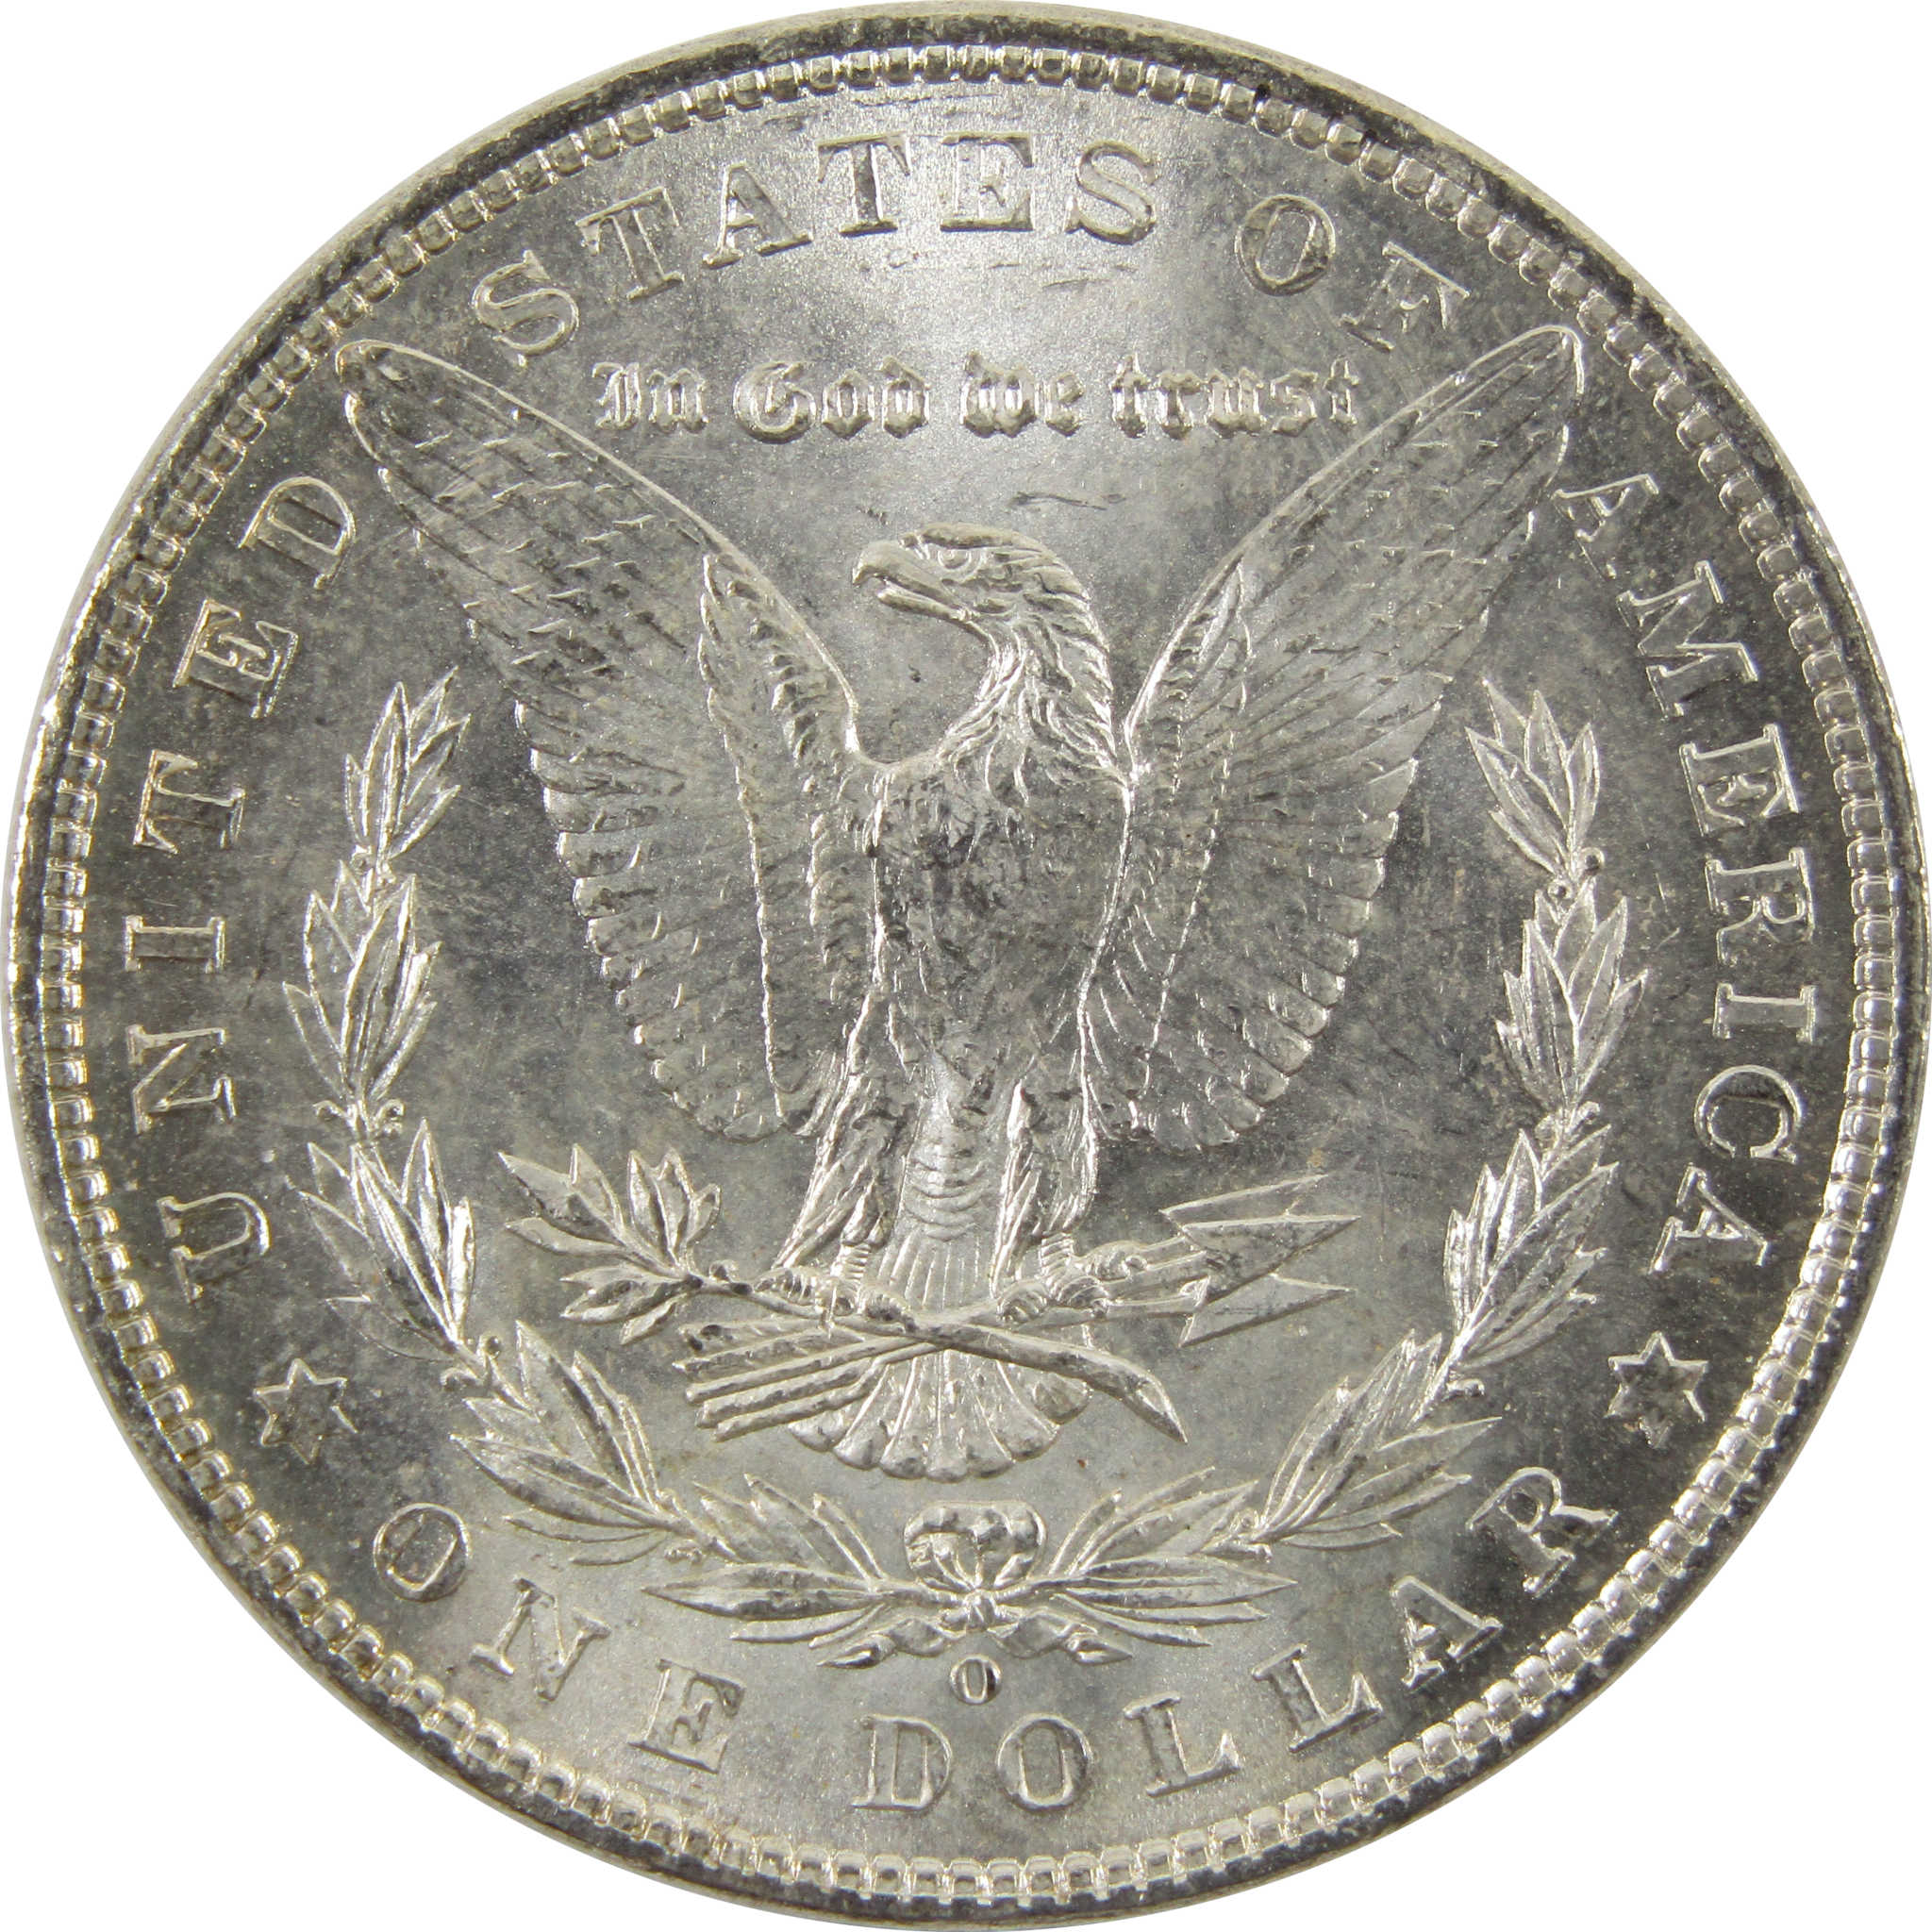 1901 O Morgan Dollar Uncirculated Details 90% Silver $1 SKU:I10466 - Morgan coin - Morgan silver dollar - Morgan silver dollar for sale - Profile Coins &amp; Collectibles